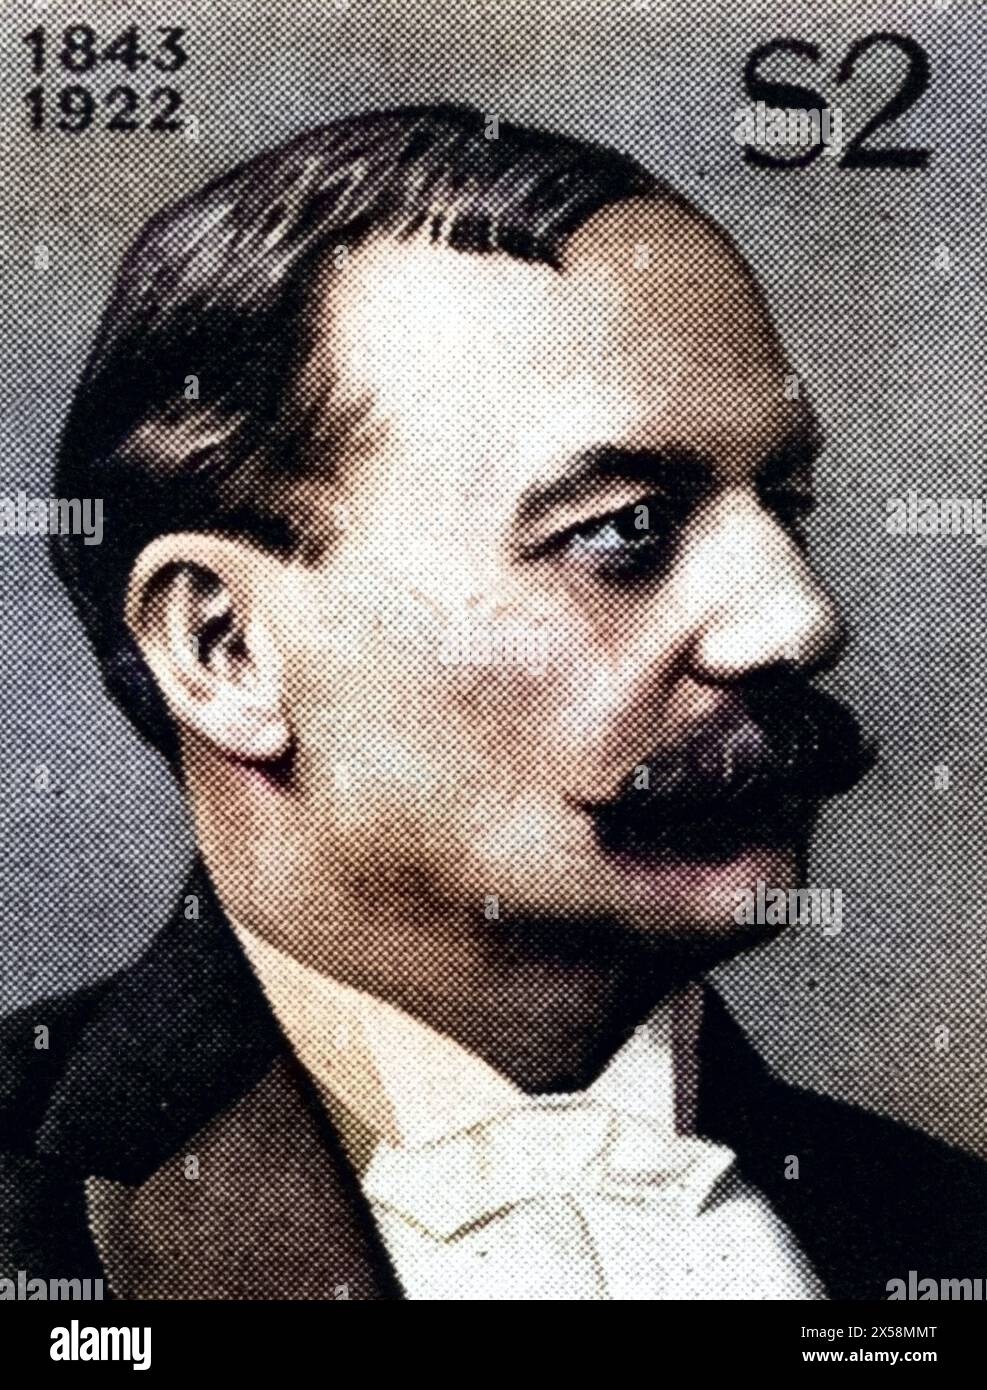 Ziehrer, Carl Michael, 2.5.1843 - 14.11.1922, Austrian composer, conductor, portrait, stamp, ADDITIONAL-RIGHTS-CLEARANCE-INFO-NOT-AVAILABLE Stock Photo